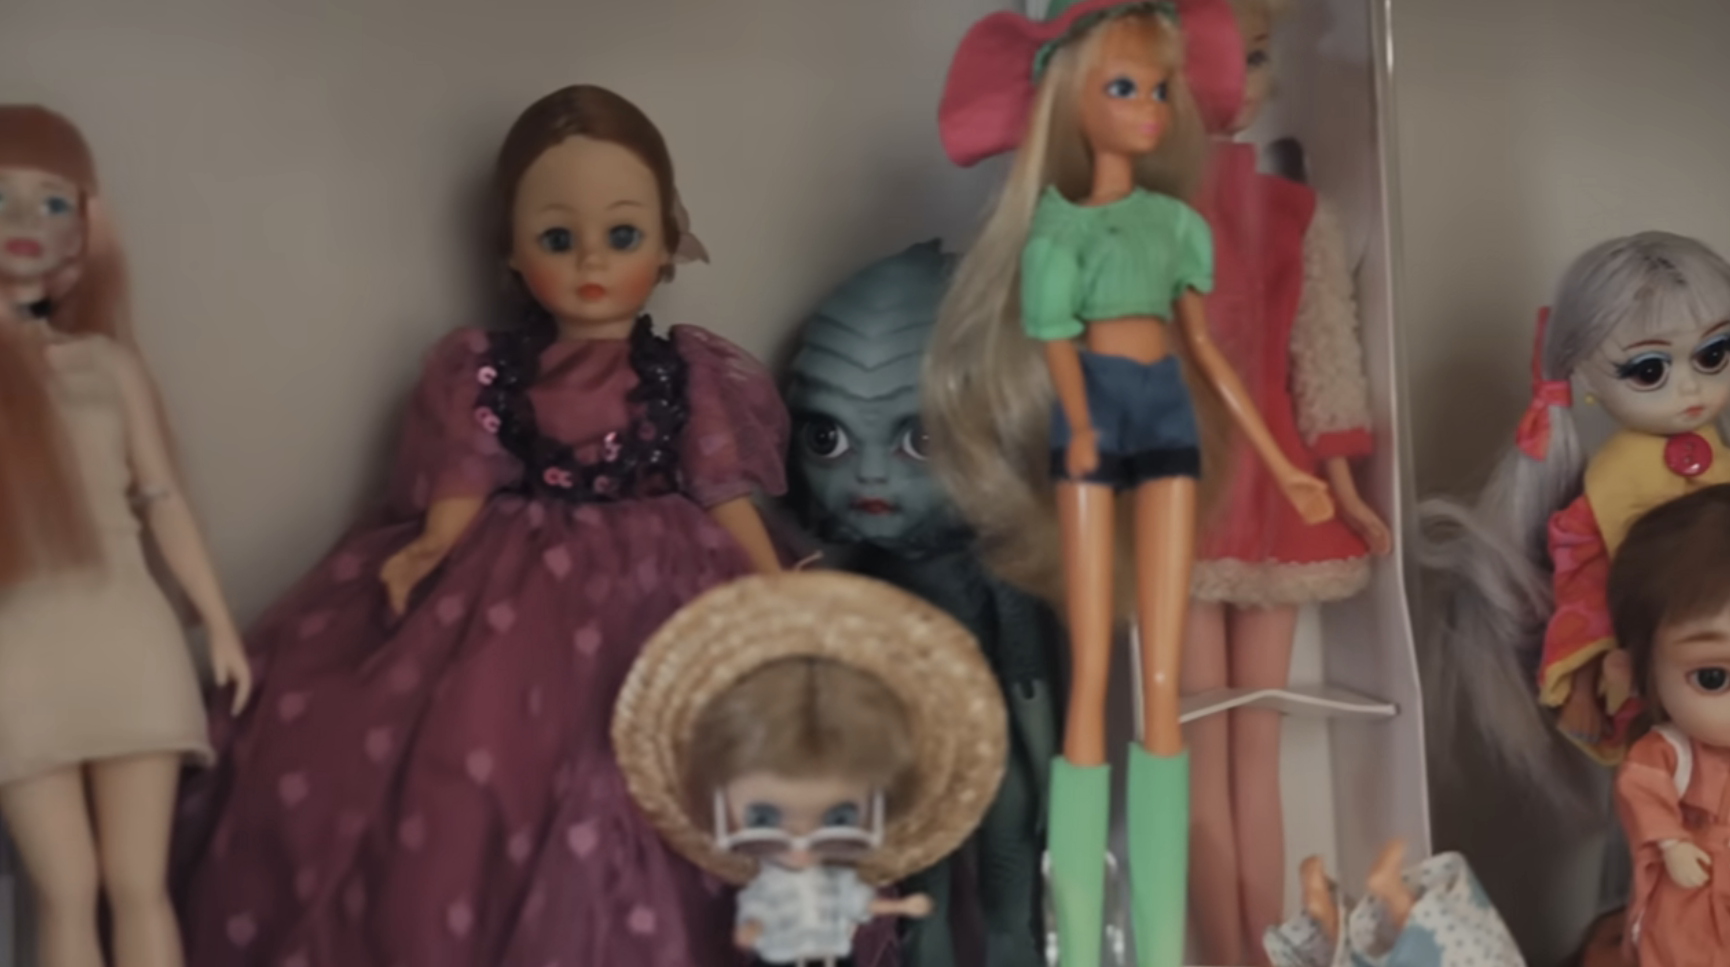 Assorted dolls of various styles on a shelf, including one with large eyes and another in a green top